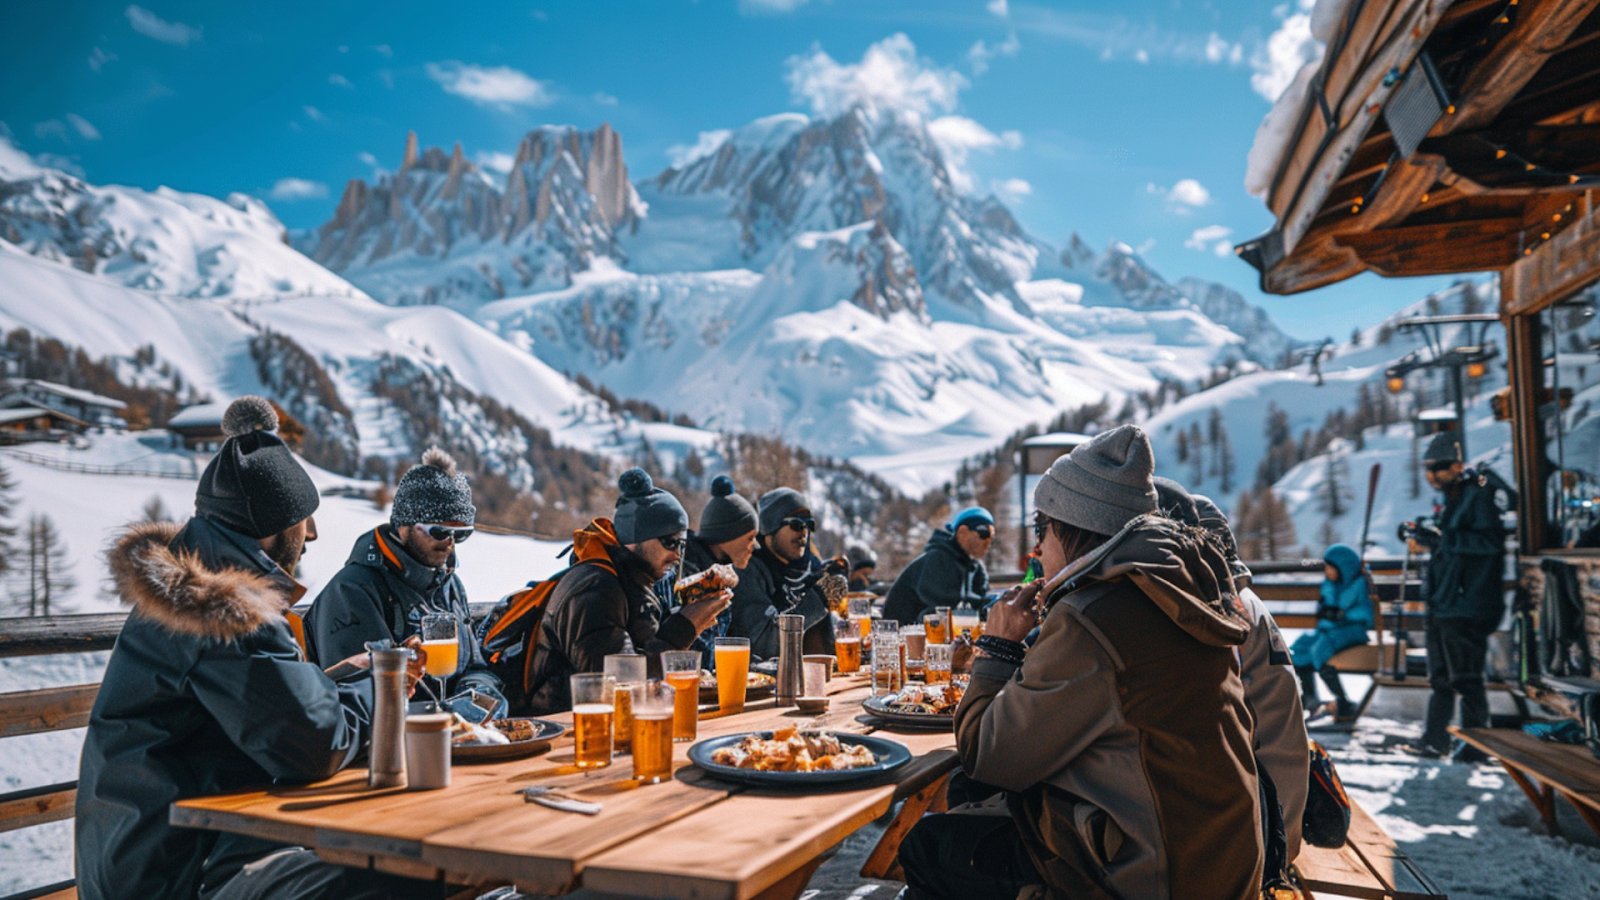 People dining at an outdoor restaurant in Courchevel, France